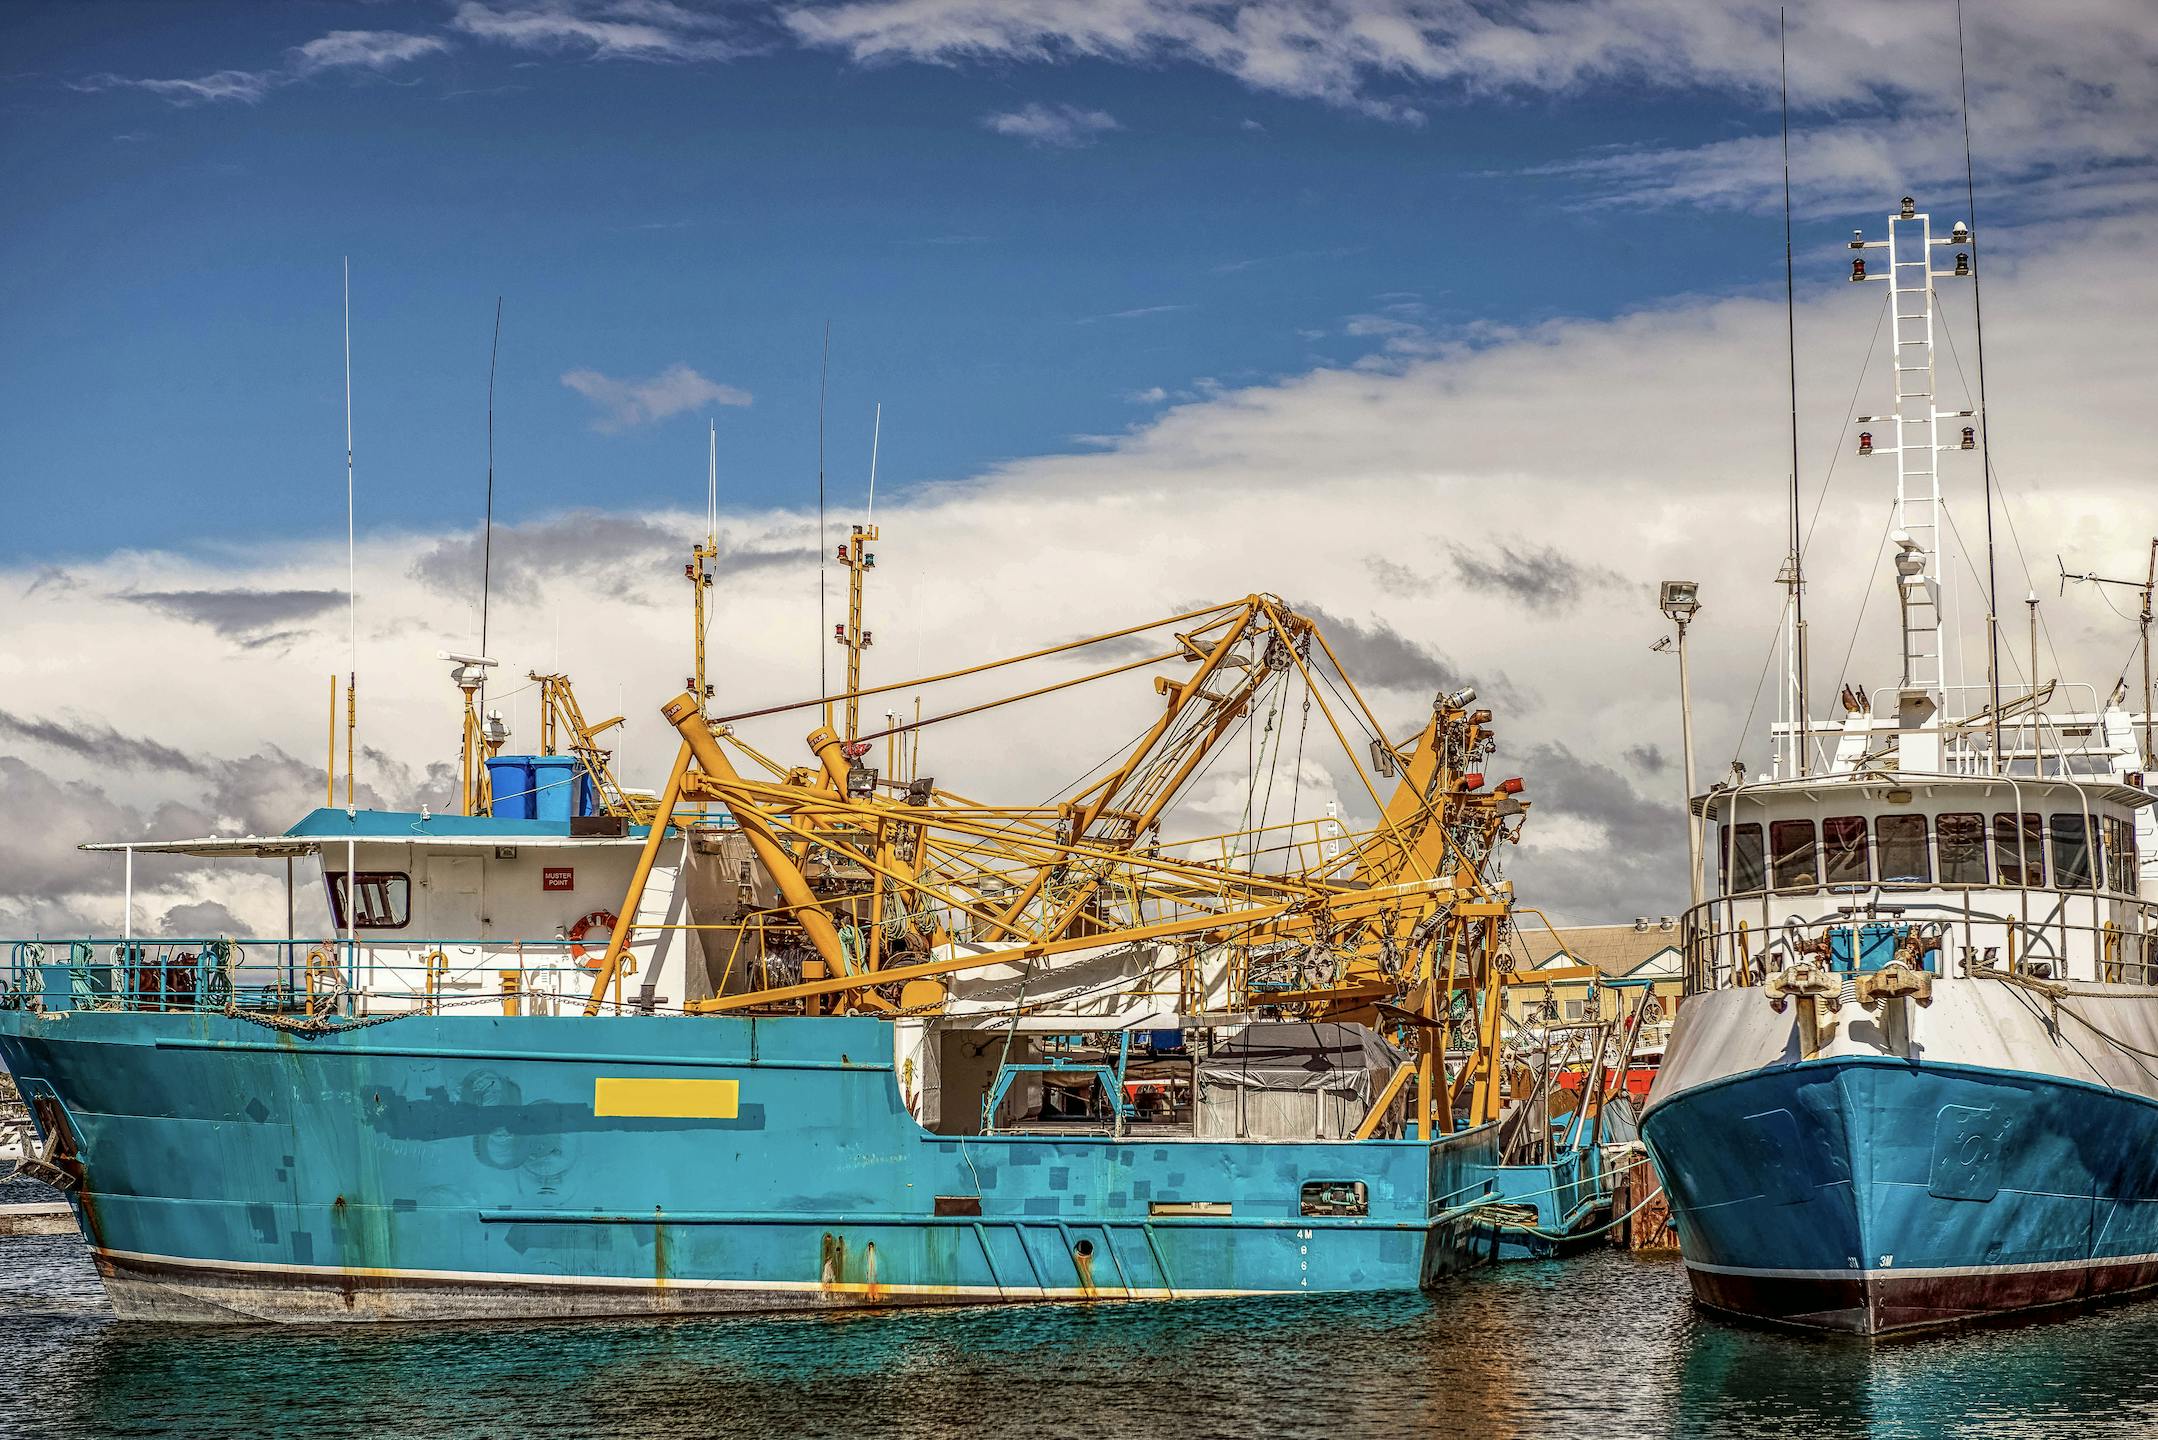 Strengthening the control regime: An important step towards more sustainable fisheries in the EU